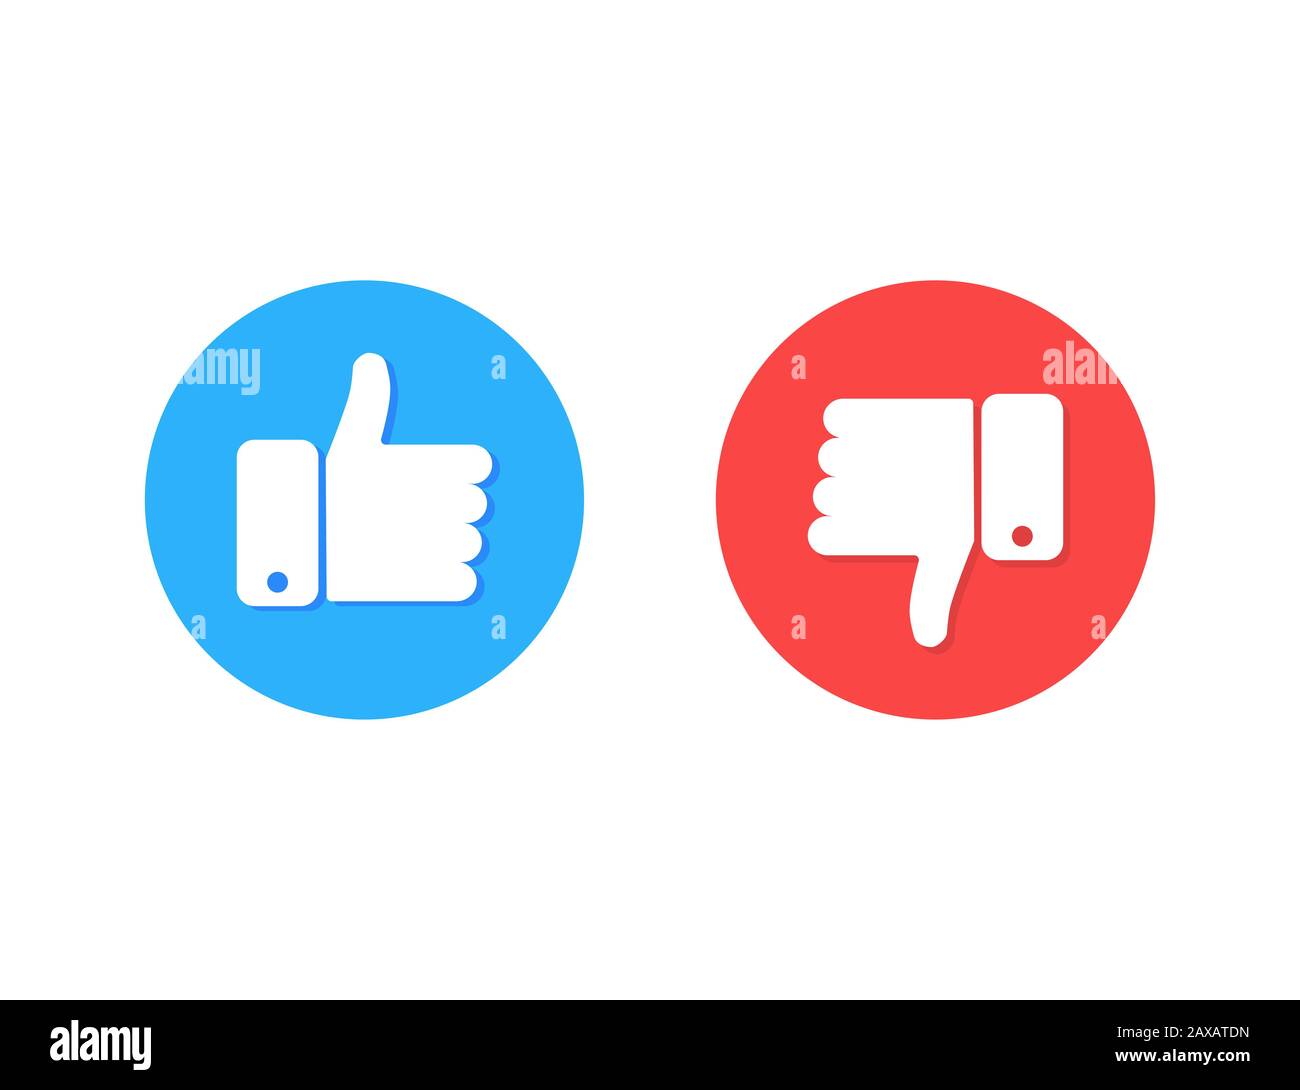 Thumb up thunb down blue and red color white background internet symbol good or bad work. Flat design. EPS 10 Stock Photo